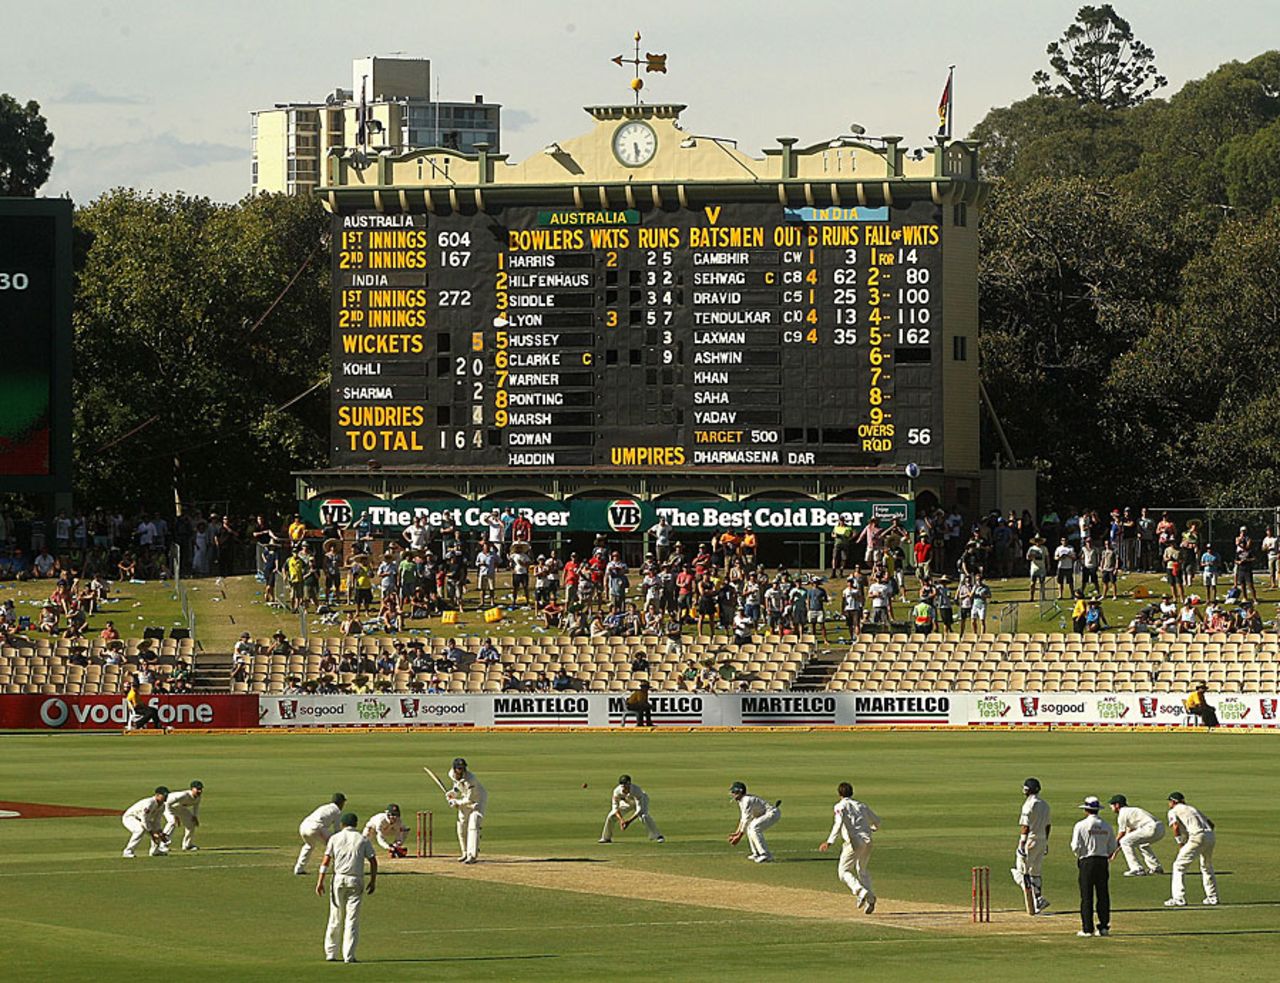 It was a case of all-out attack from Australia when nightwatchman Ishant Sharma arrived, Australia v India, 4th Test, Adelaide, 4th day, January 27, 2012